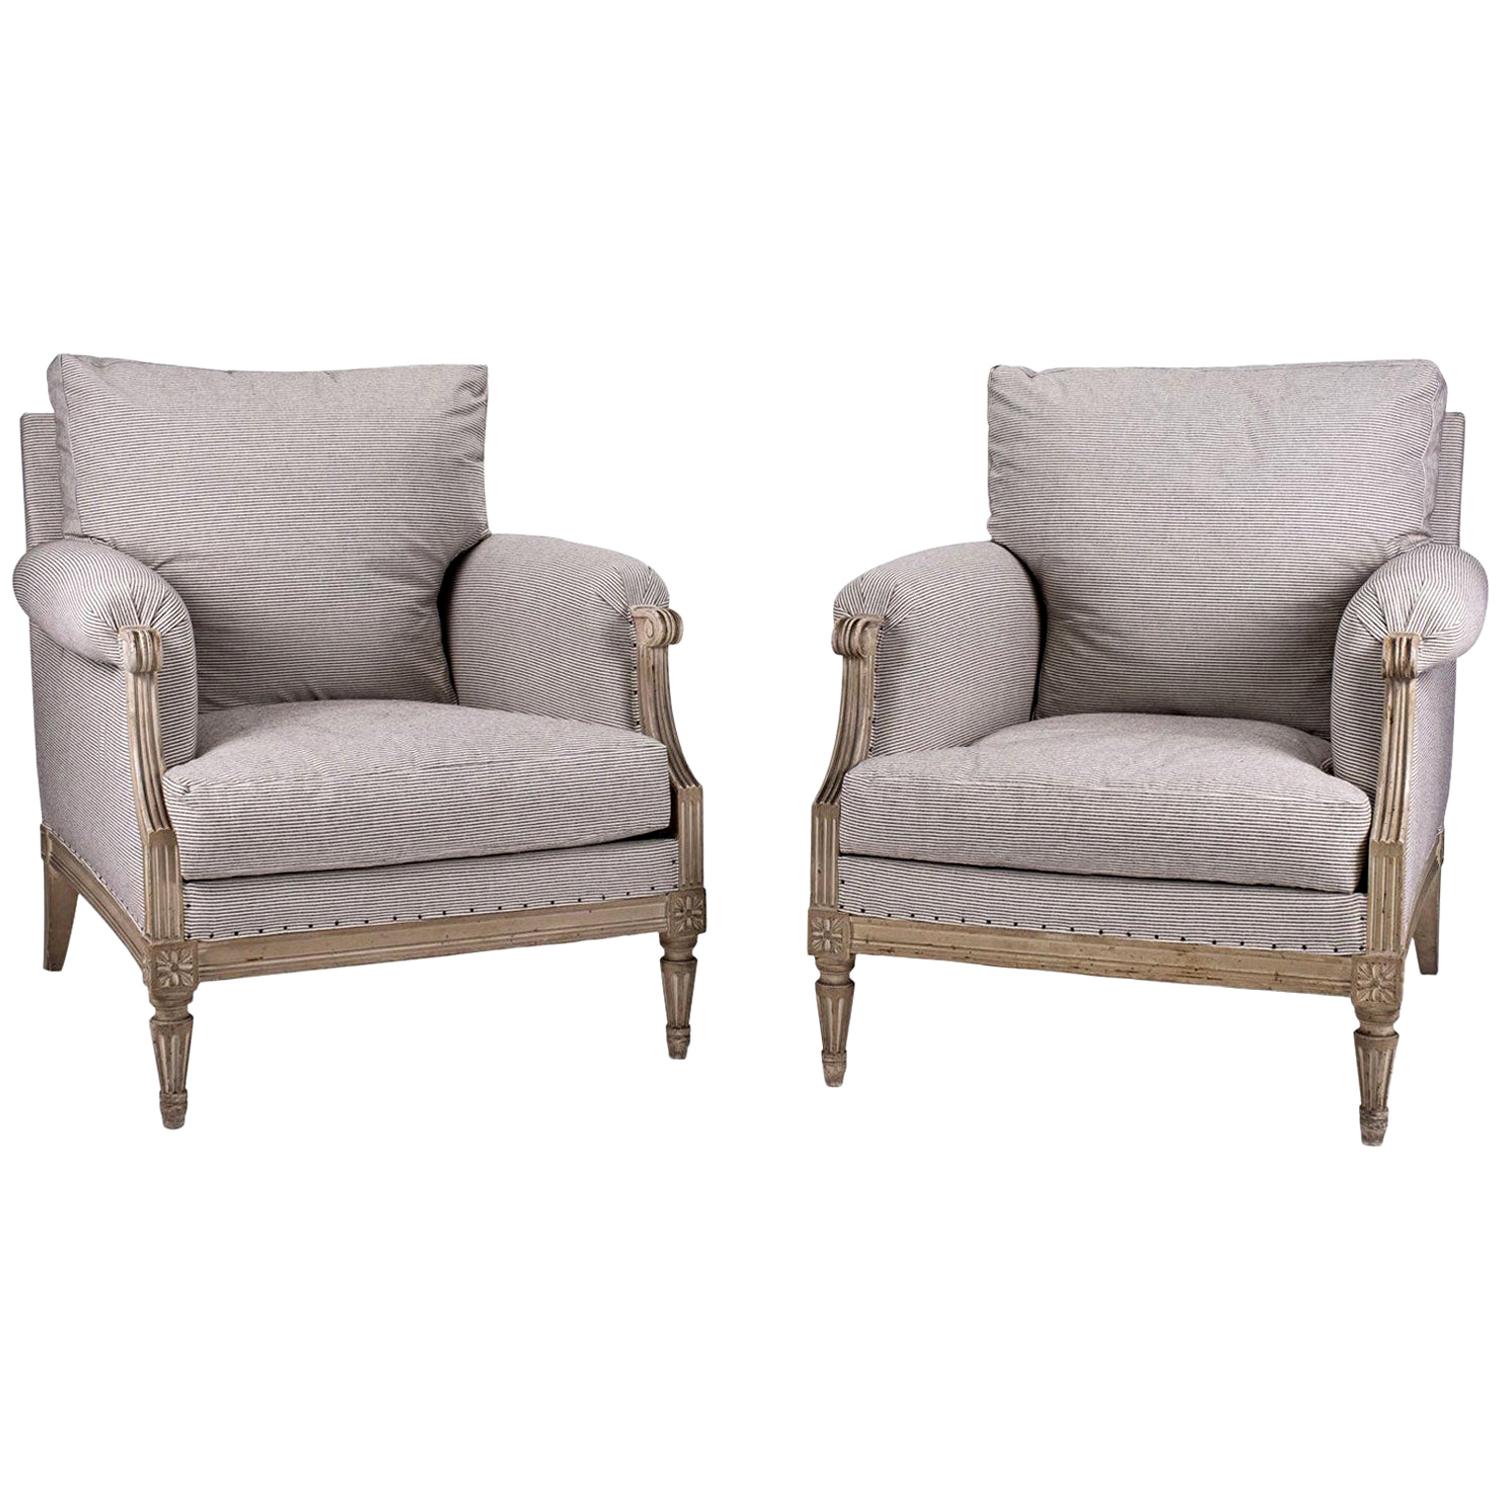 Pair of Large Scale Painted Bergère Armchairs in Ticking